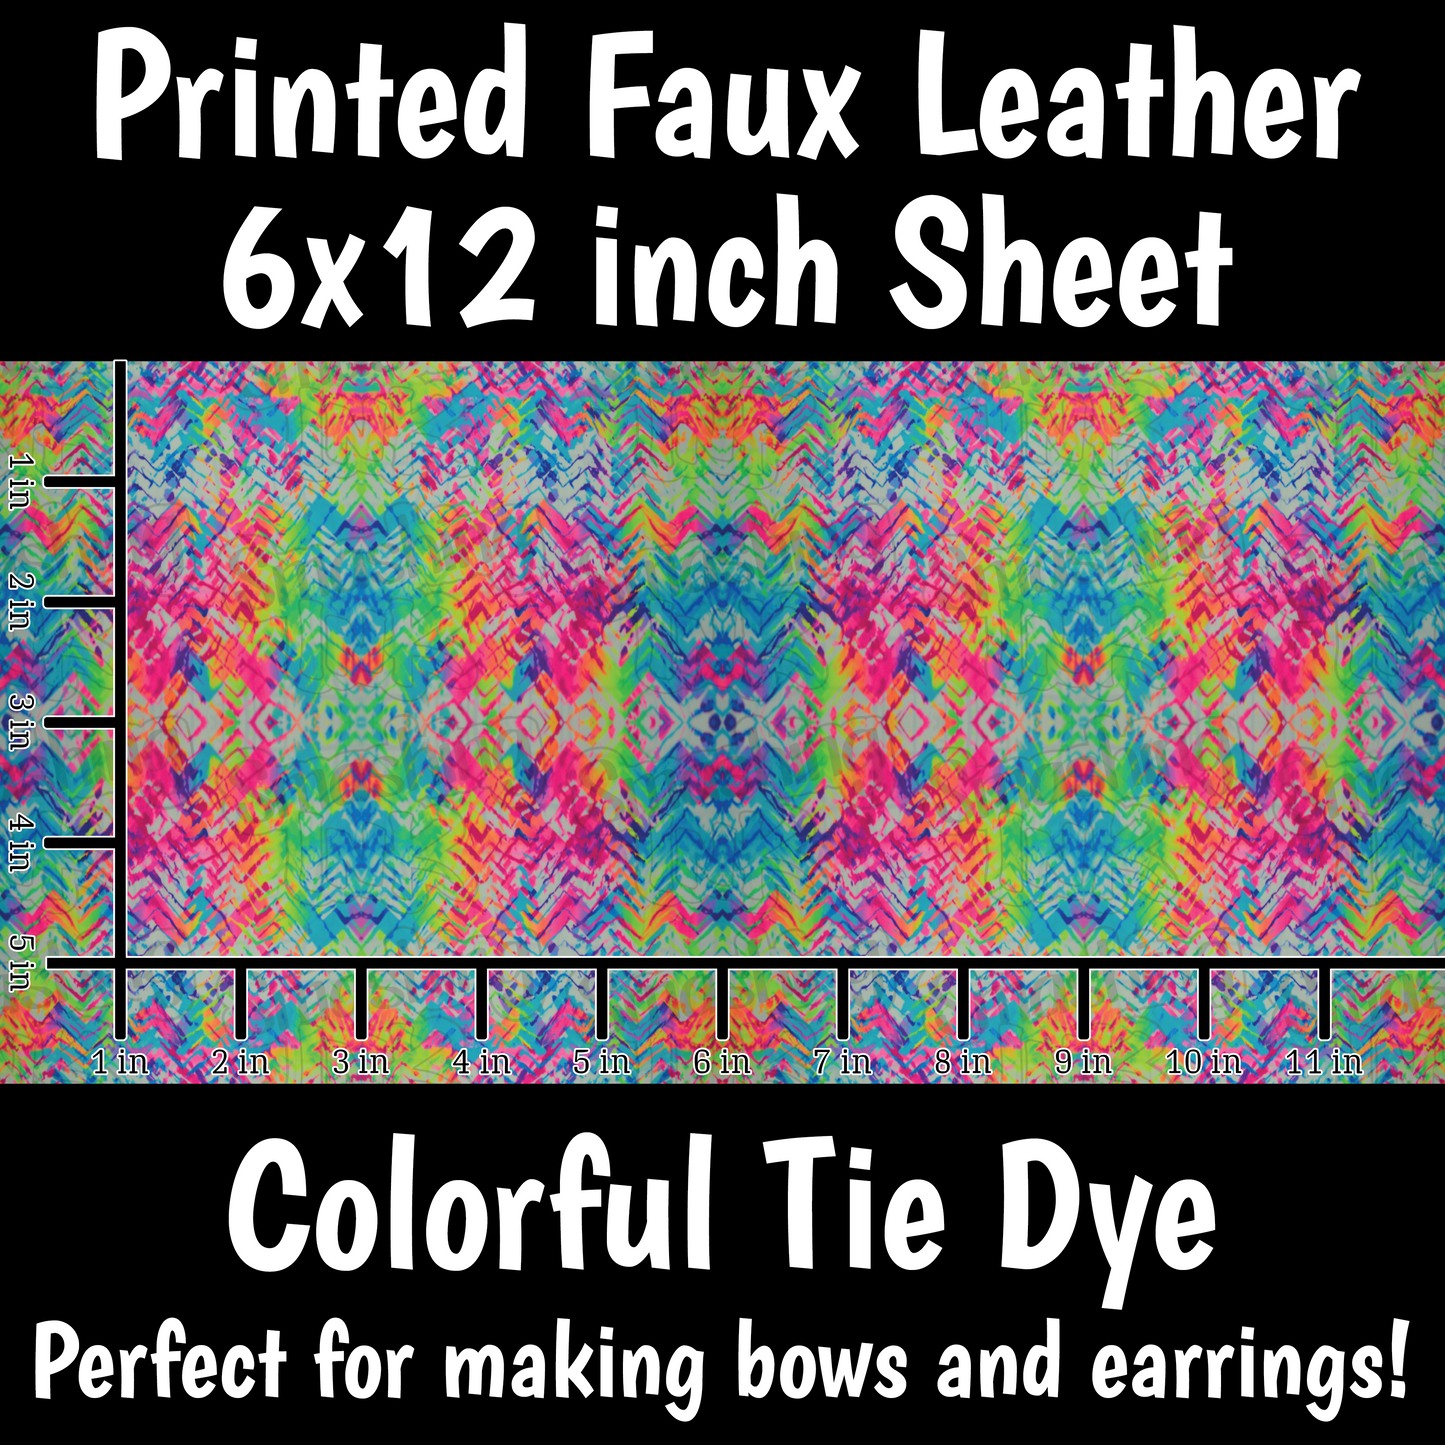 Colorful Tie Dye- Faux Leather Sheet (SHIPS IN 3 BUS DAYS)